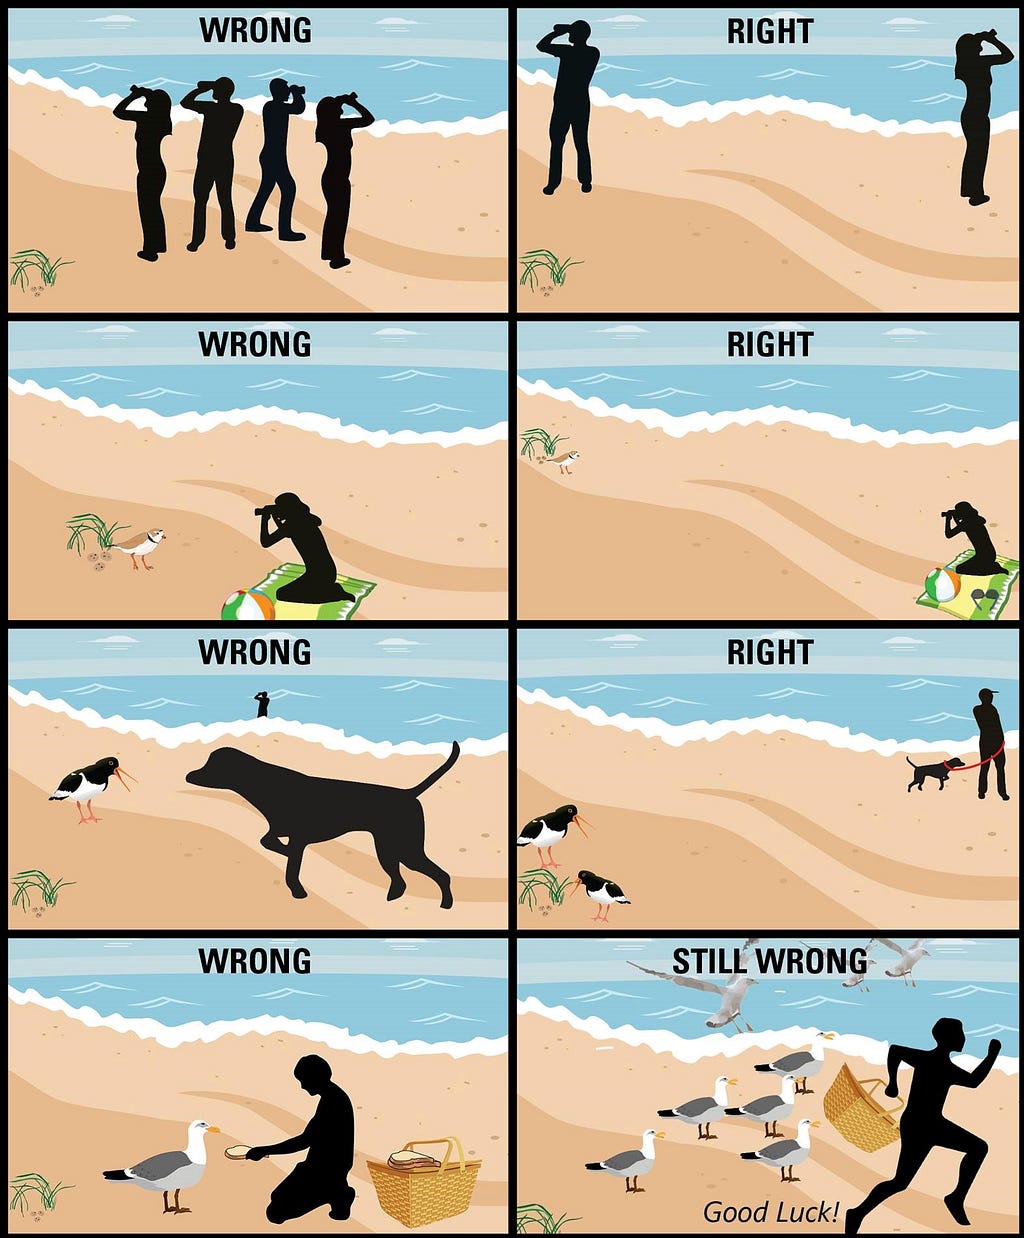 Eight-panel cartoon. All scenes show drawing of beach and ocean. Panel 1 — Text ‘Wrong’ silhouette of group birding. Panel 2 — Text ‘Right’ silhouette of 2 birders separated. Panel 3 — Text ‘Wrong’ silhouette of birder too close to small bird. Panel 4 — Text ‘Right’ silhouette of birder keeping distance. Panel 5 — Text ‘Wrong’ silhouette of dog close to small bird no leash. Panel 6 — Text ‘Right’ two small birds dog far away on leash. Pane